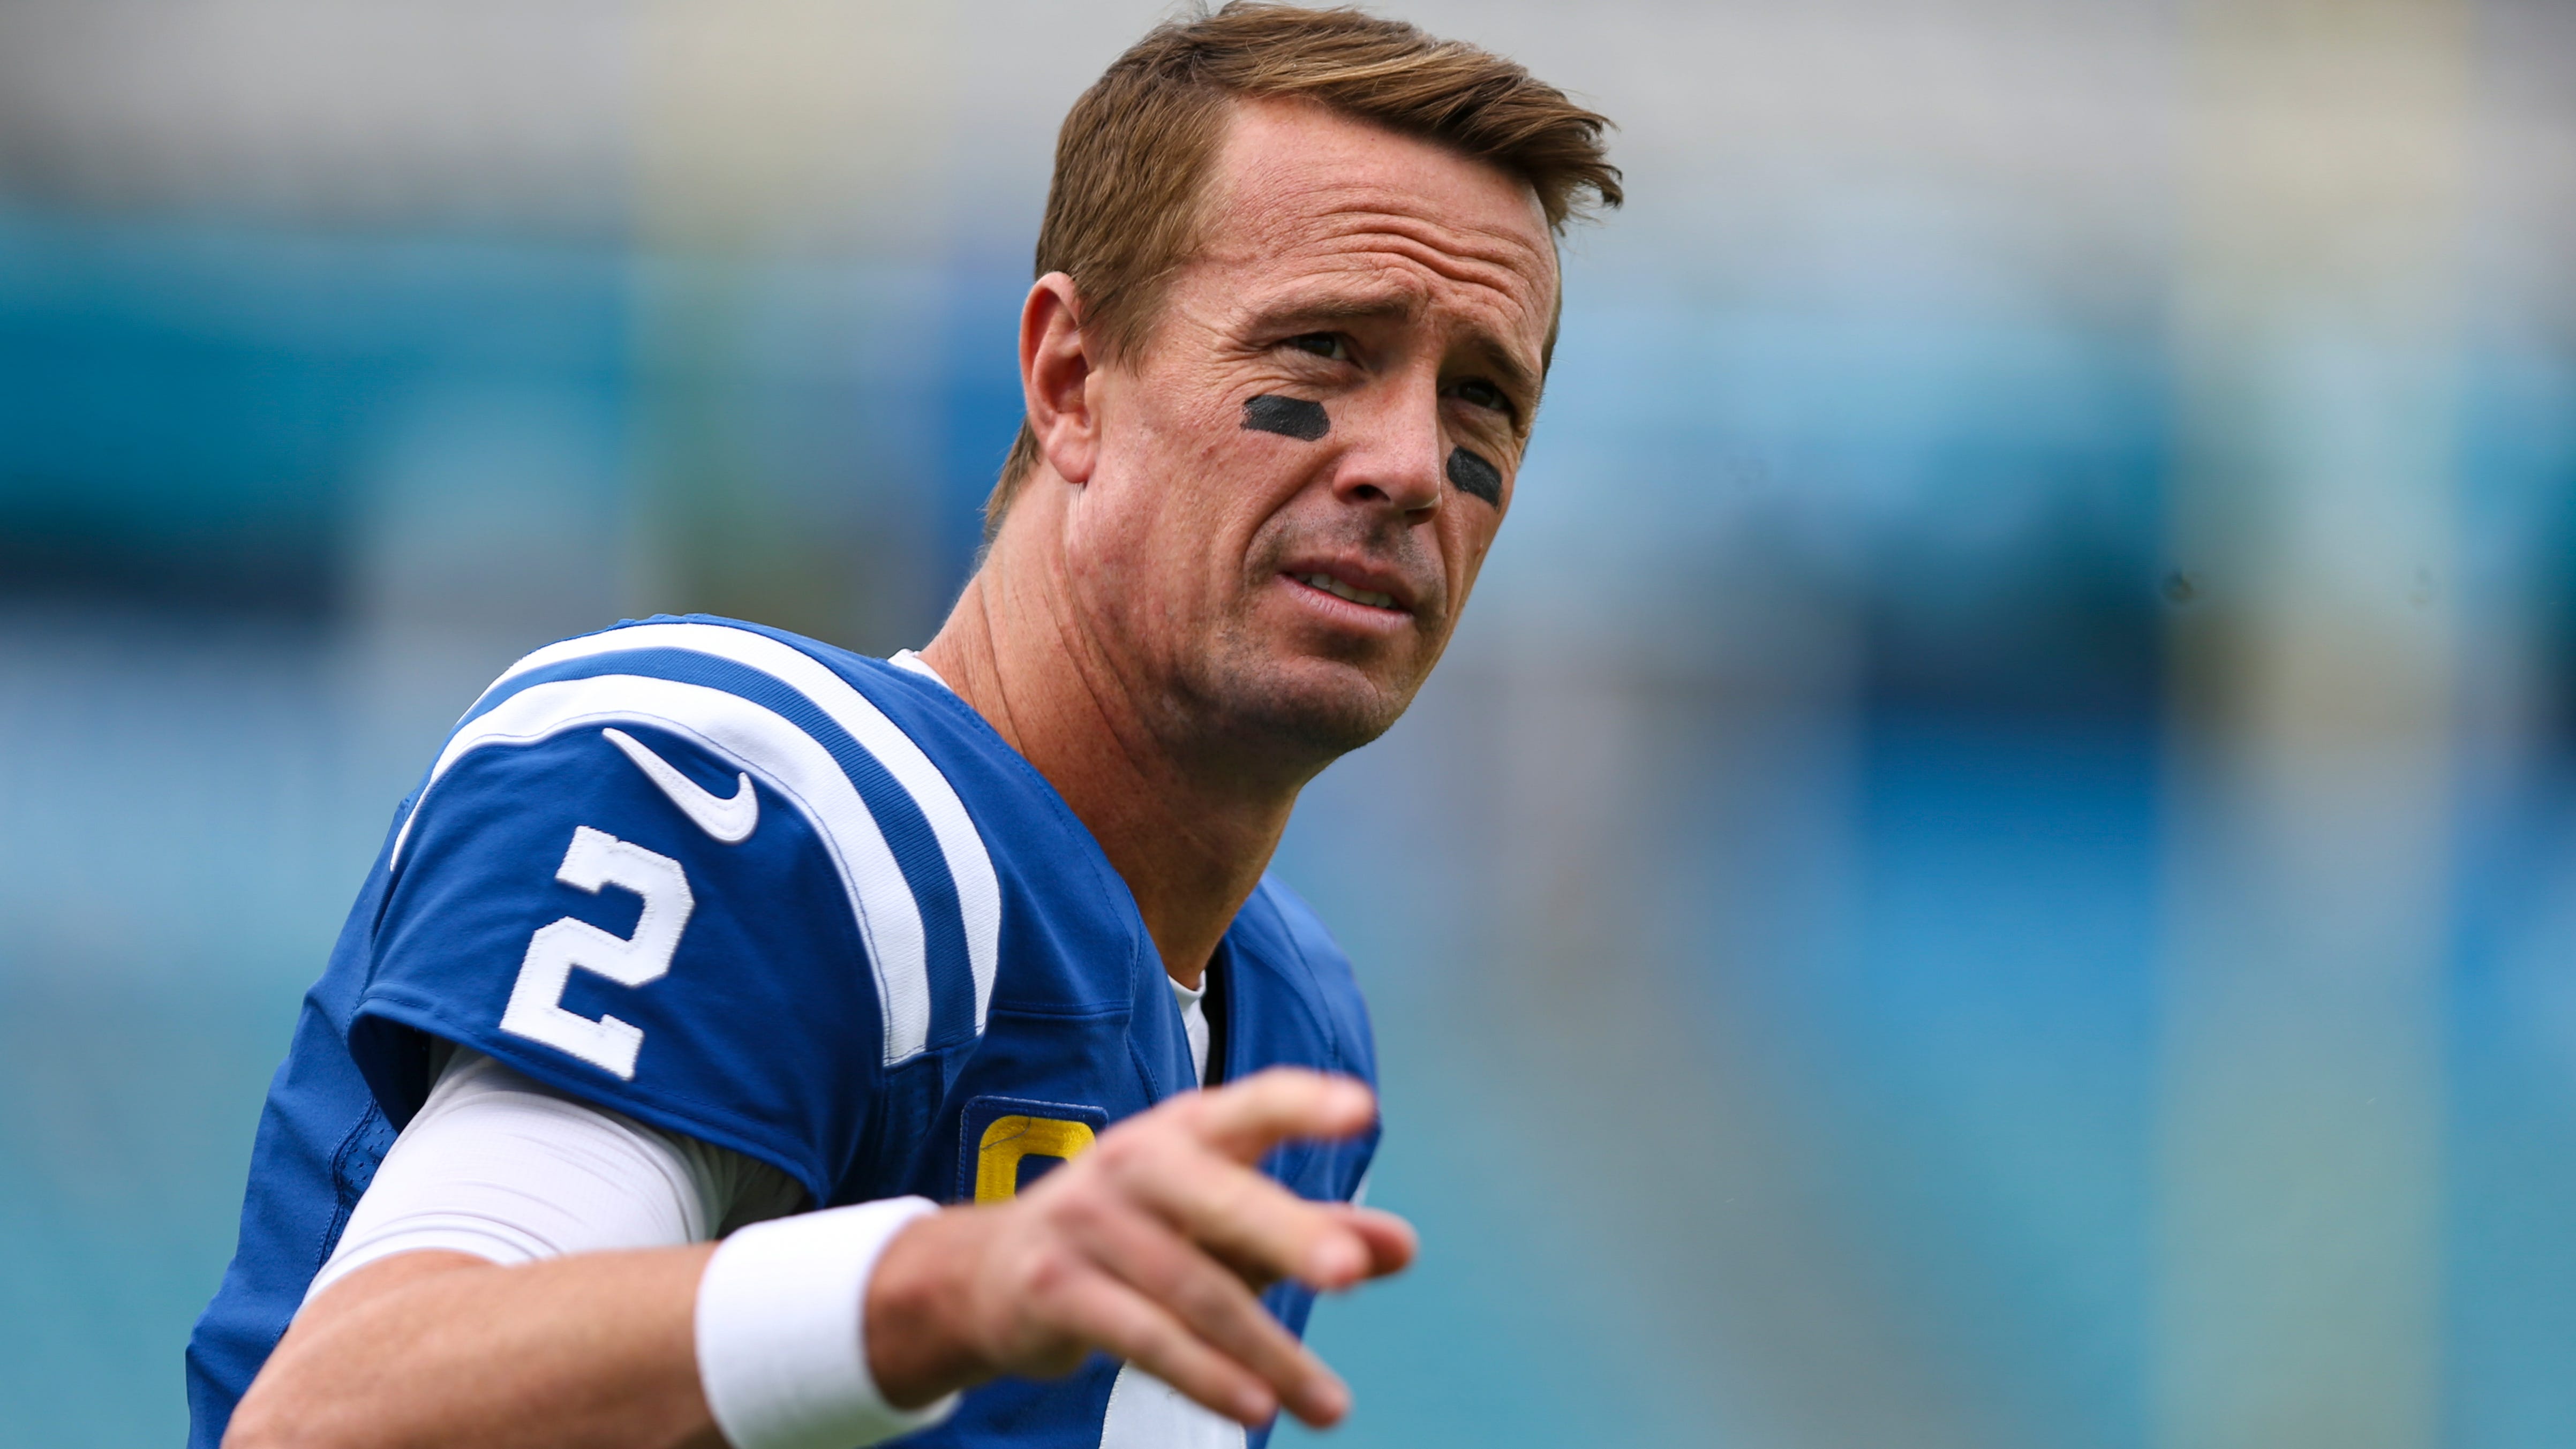 Matt Ryan and the Indianapolis Colts are scheduled to face the Denver Broncos on Thursday Night Football in an NFL Week 6 game that can be seen on Amazon Prime Video.